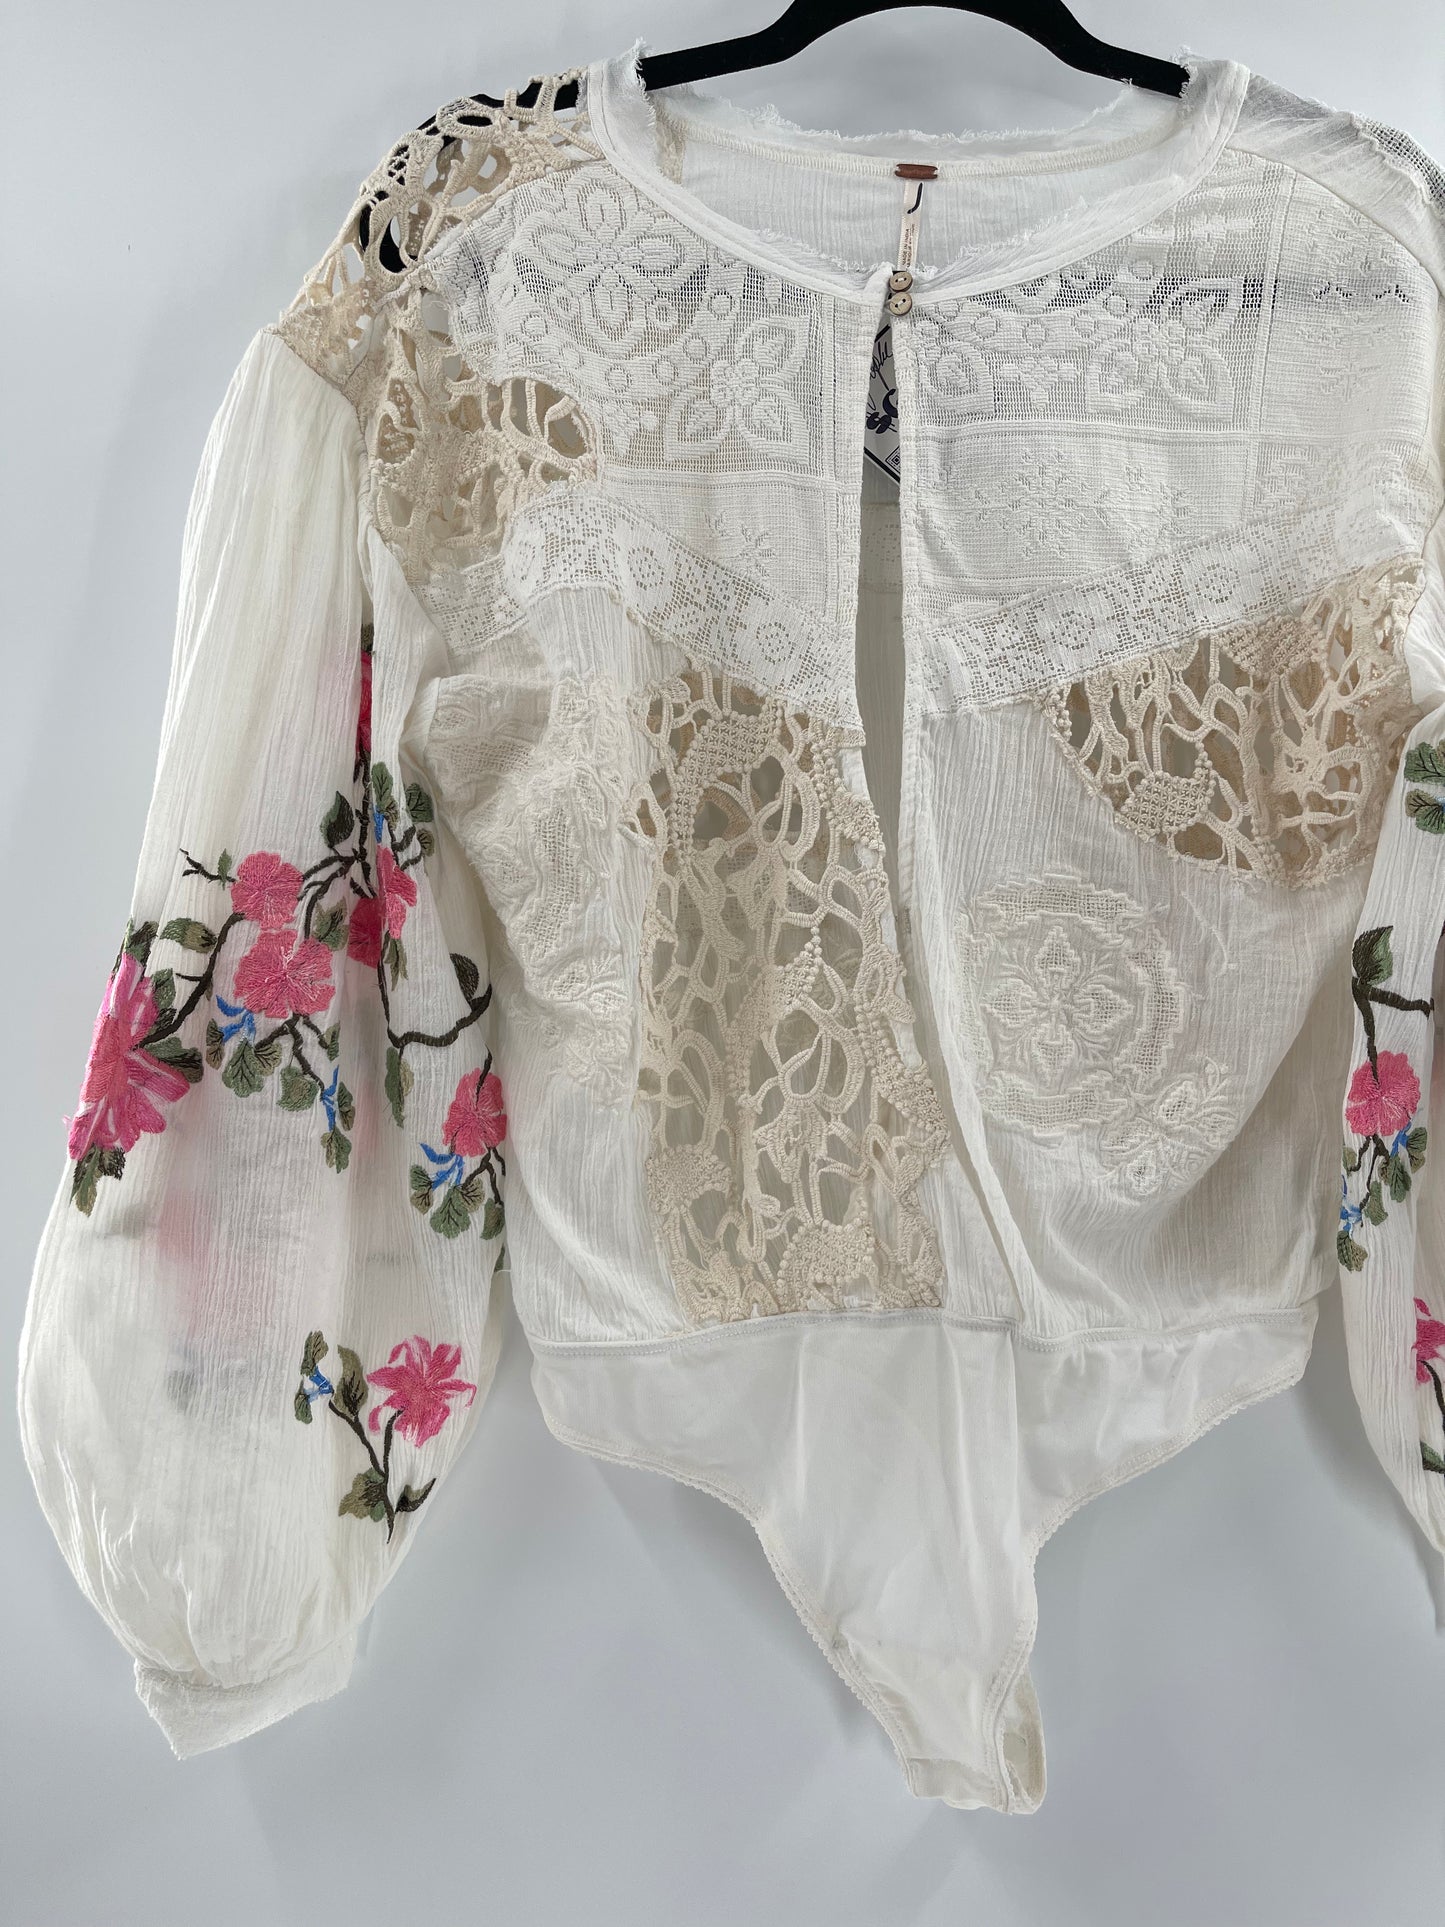 Free People Making Harmony Lace Cotton Embroidered Blouse (Medium)